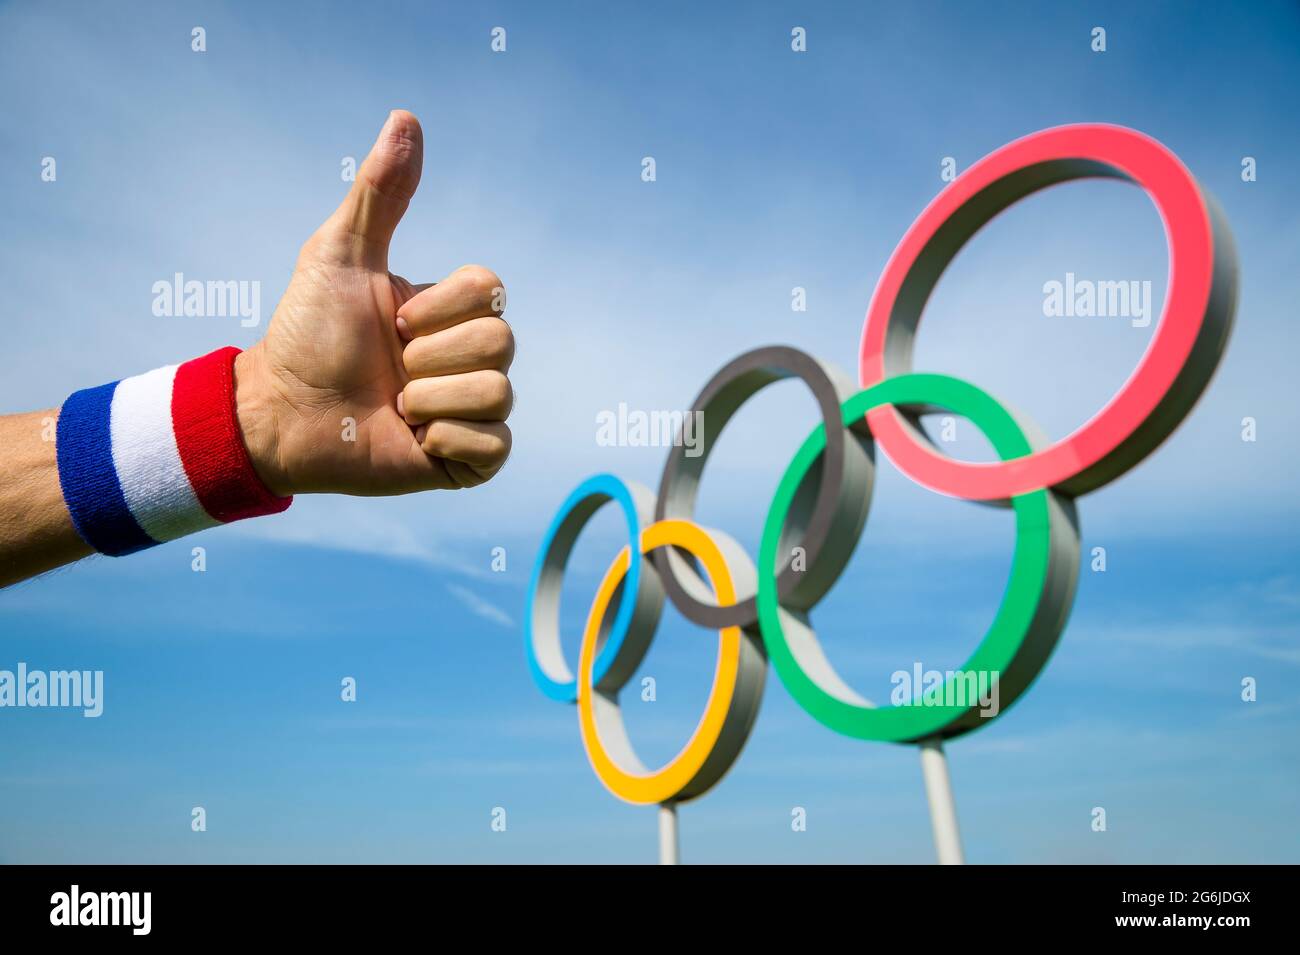 RIO DE JANEIRO - MAY 4, 2016: Athlete's hand wearing red white and blue colored wristband gives a thumbs-up gesture in front of Olympic Rings standing Stock Photo